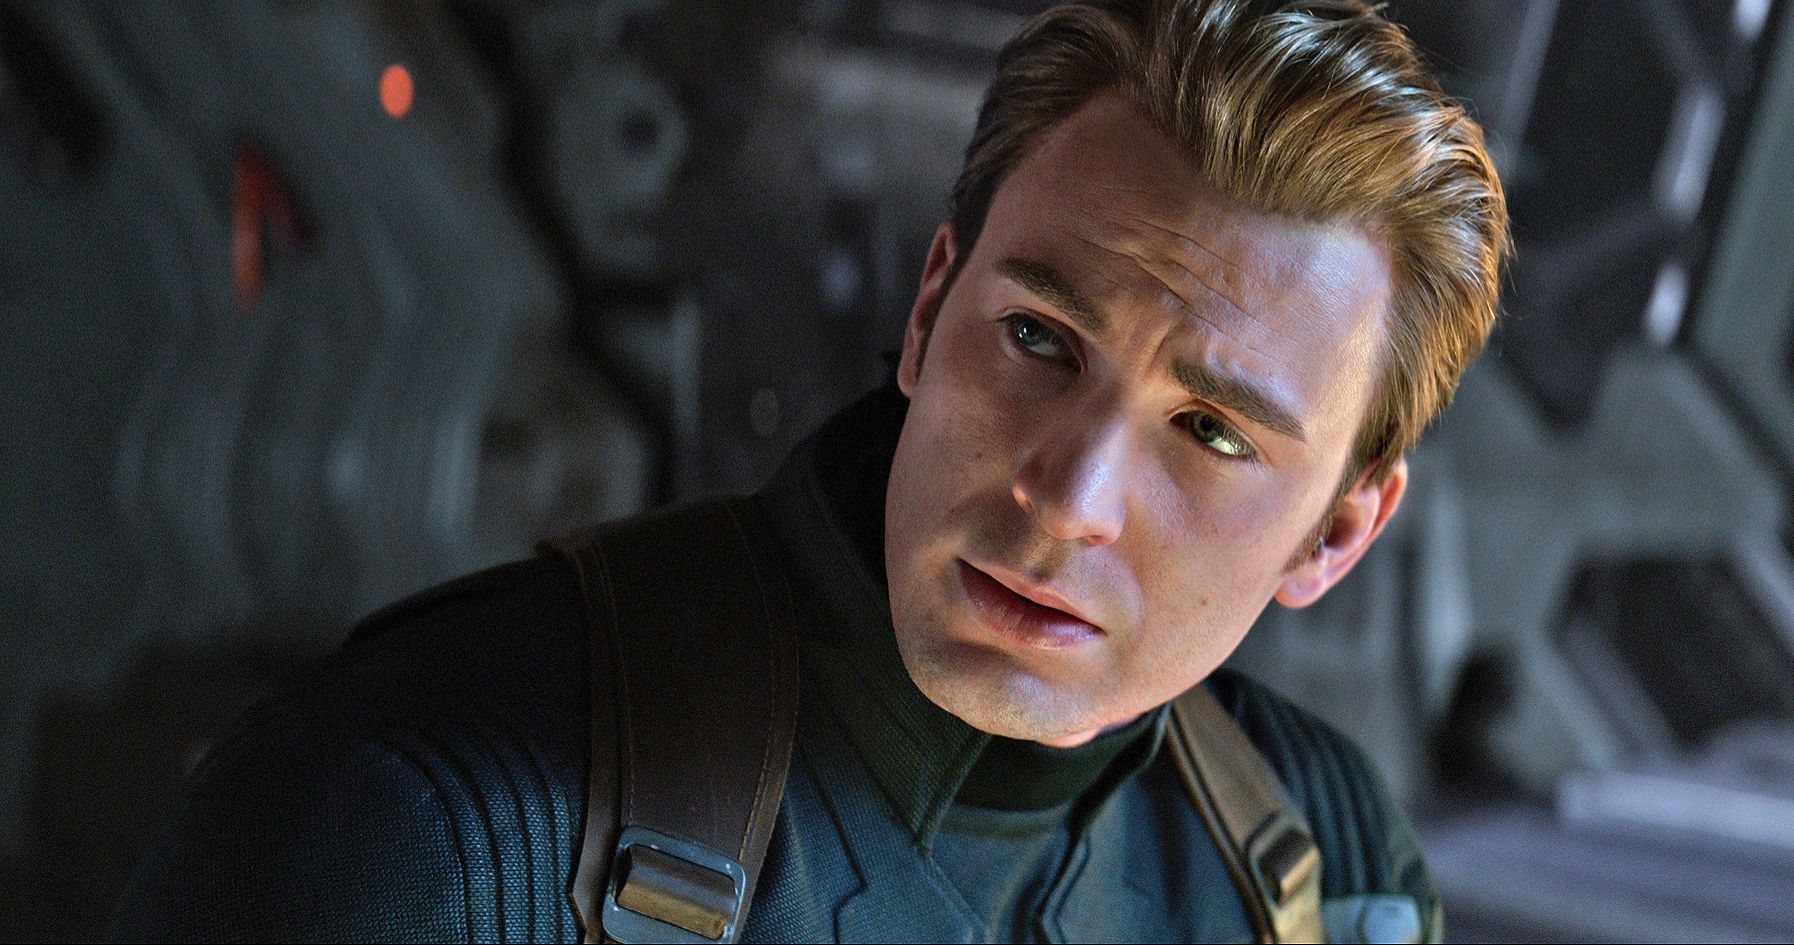 Chris Evans on Captain America's Return in the MCU: Never Say Never